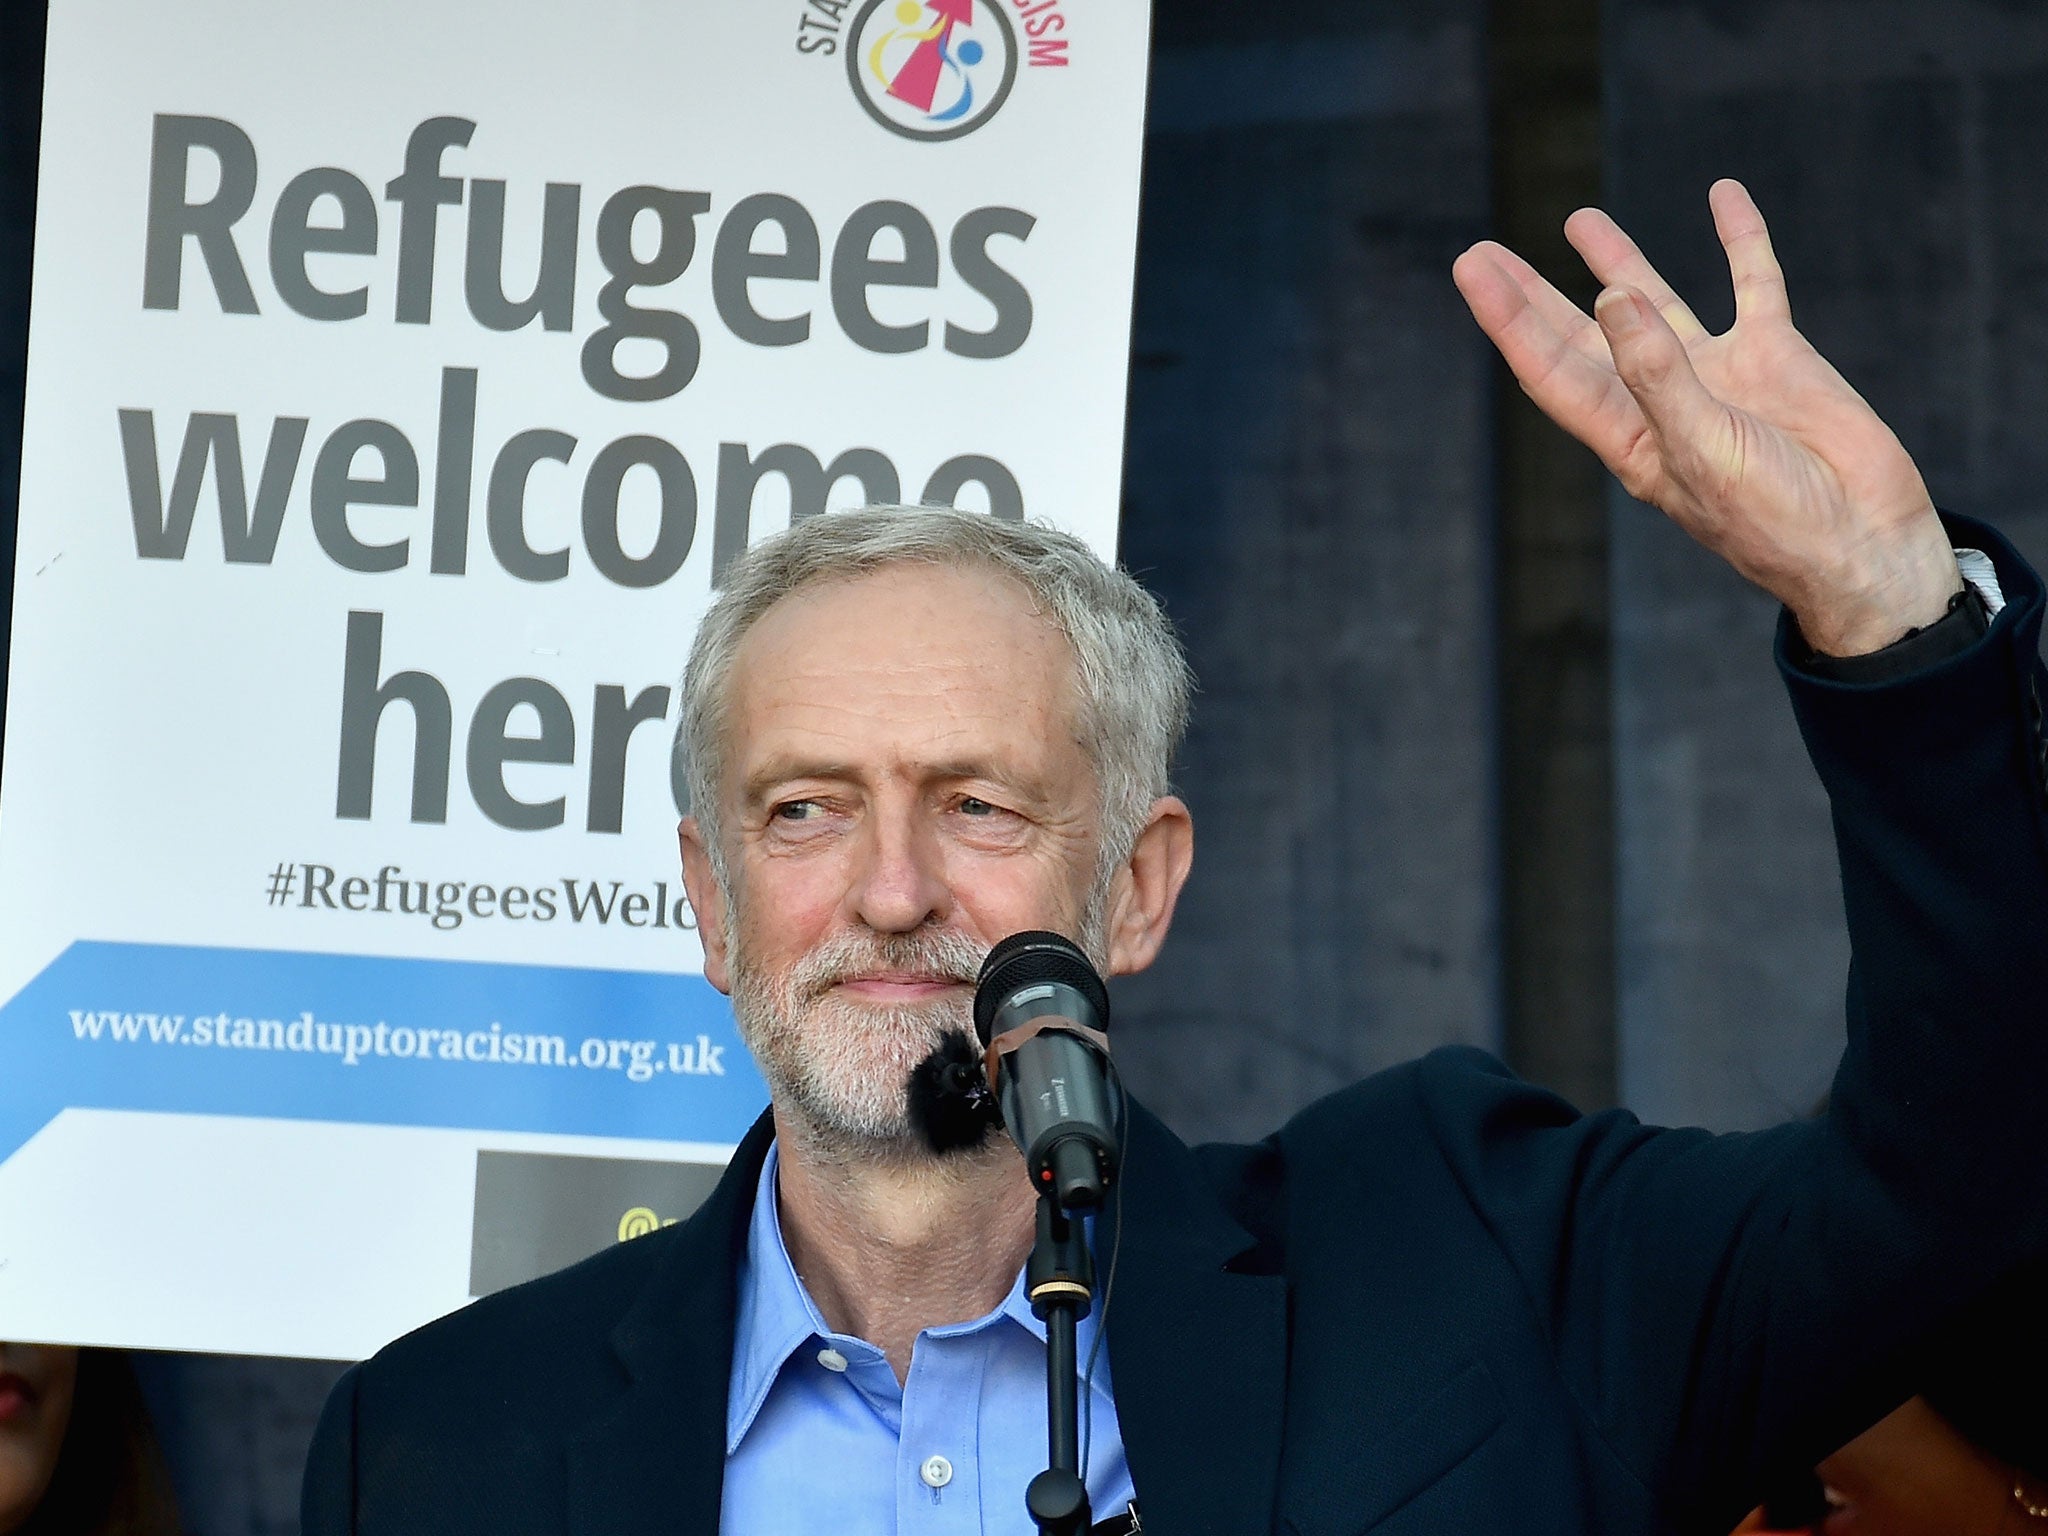 The new leader of the Labour Party Jeremy Corbyn addresses a march in support of refugees in Parliament Square, London